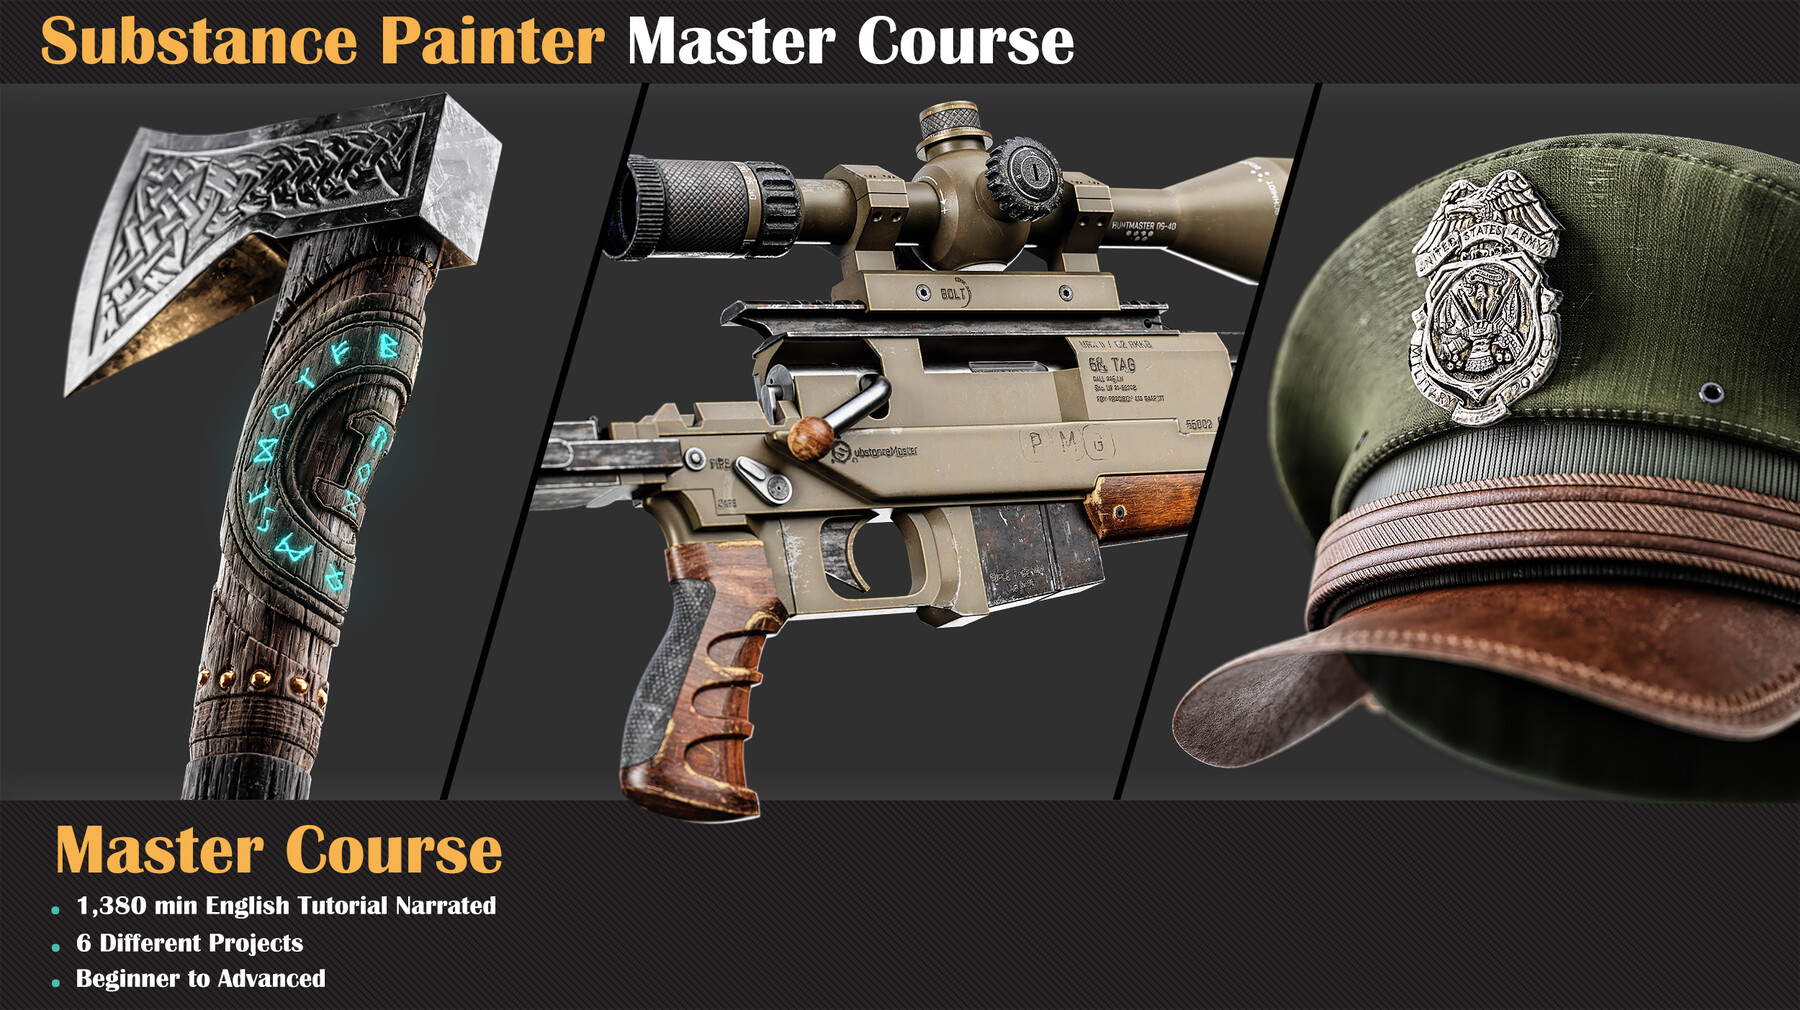 Substance Painter Master Course by Milad Kambari